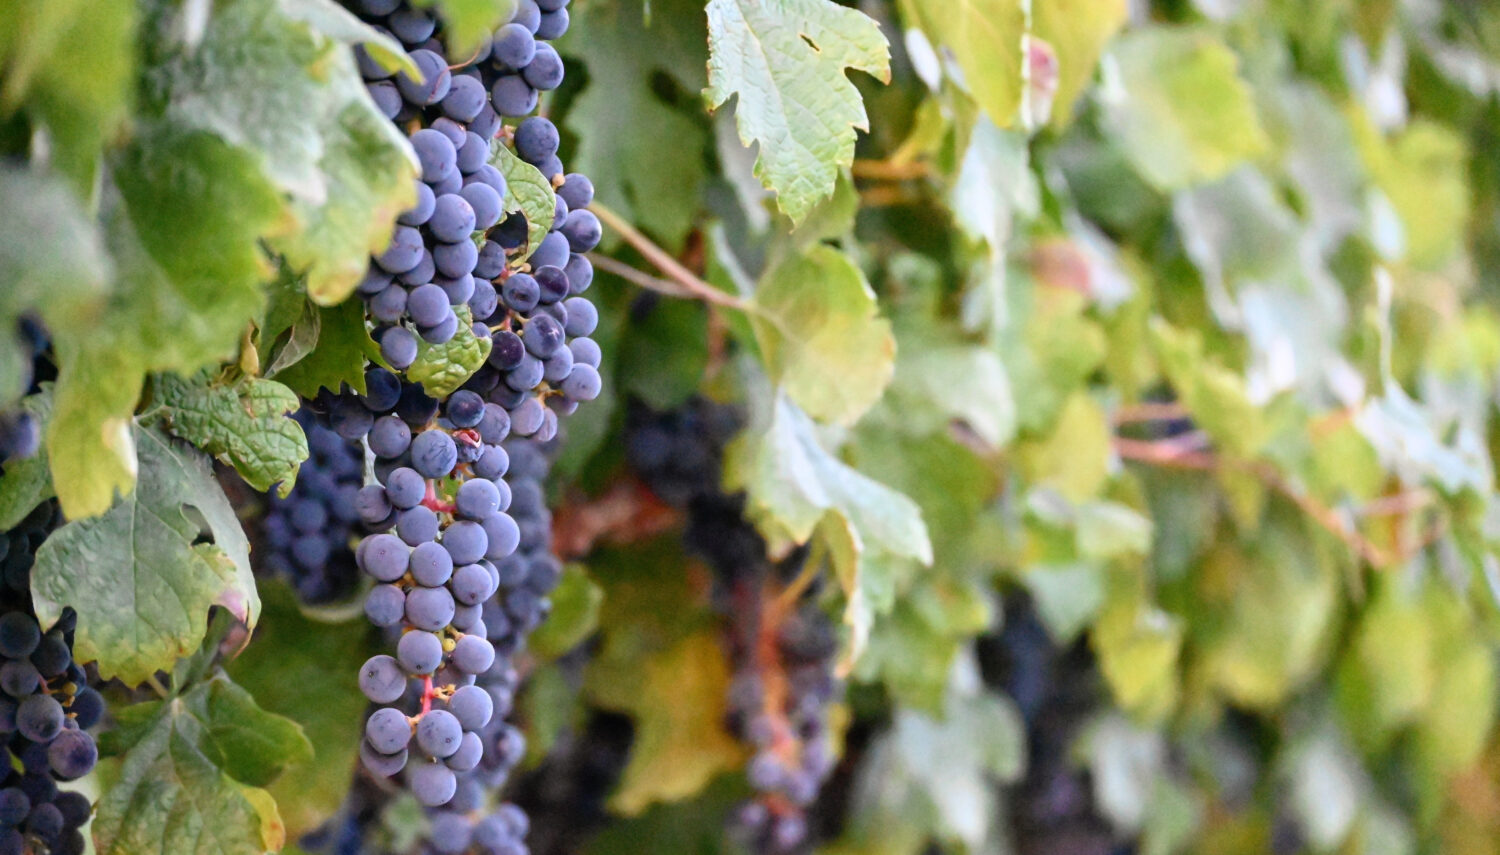 Purple wine grapes hand on a vine surrounded by bright green leaves